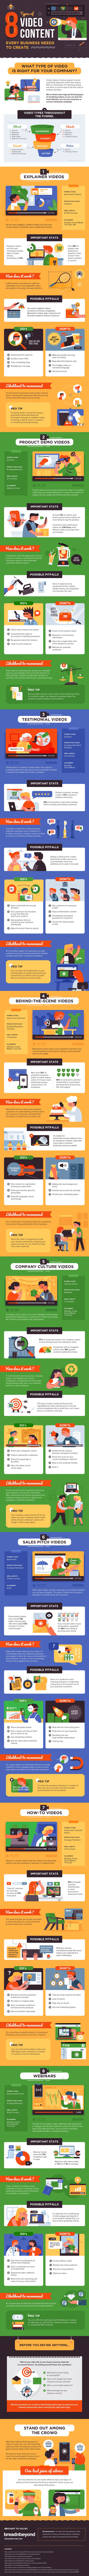 8 types of video content